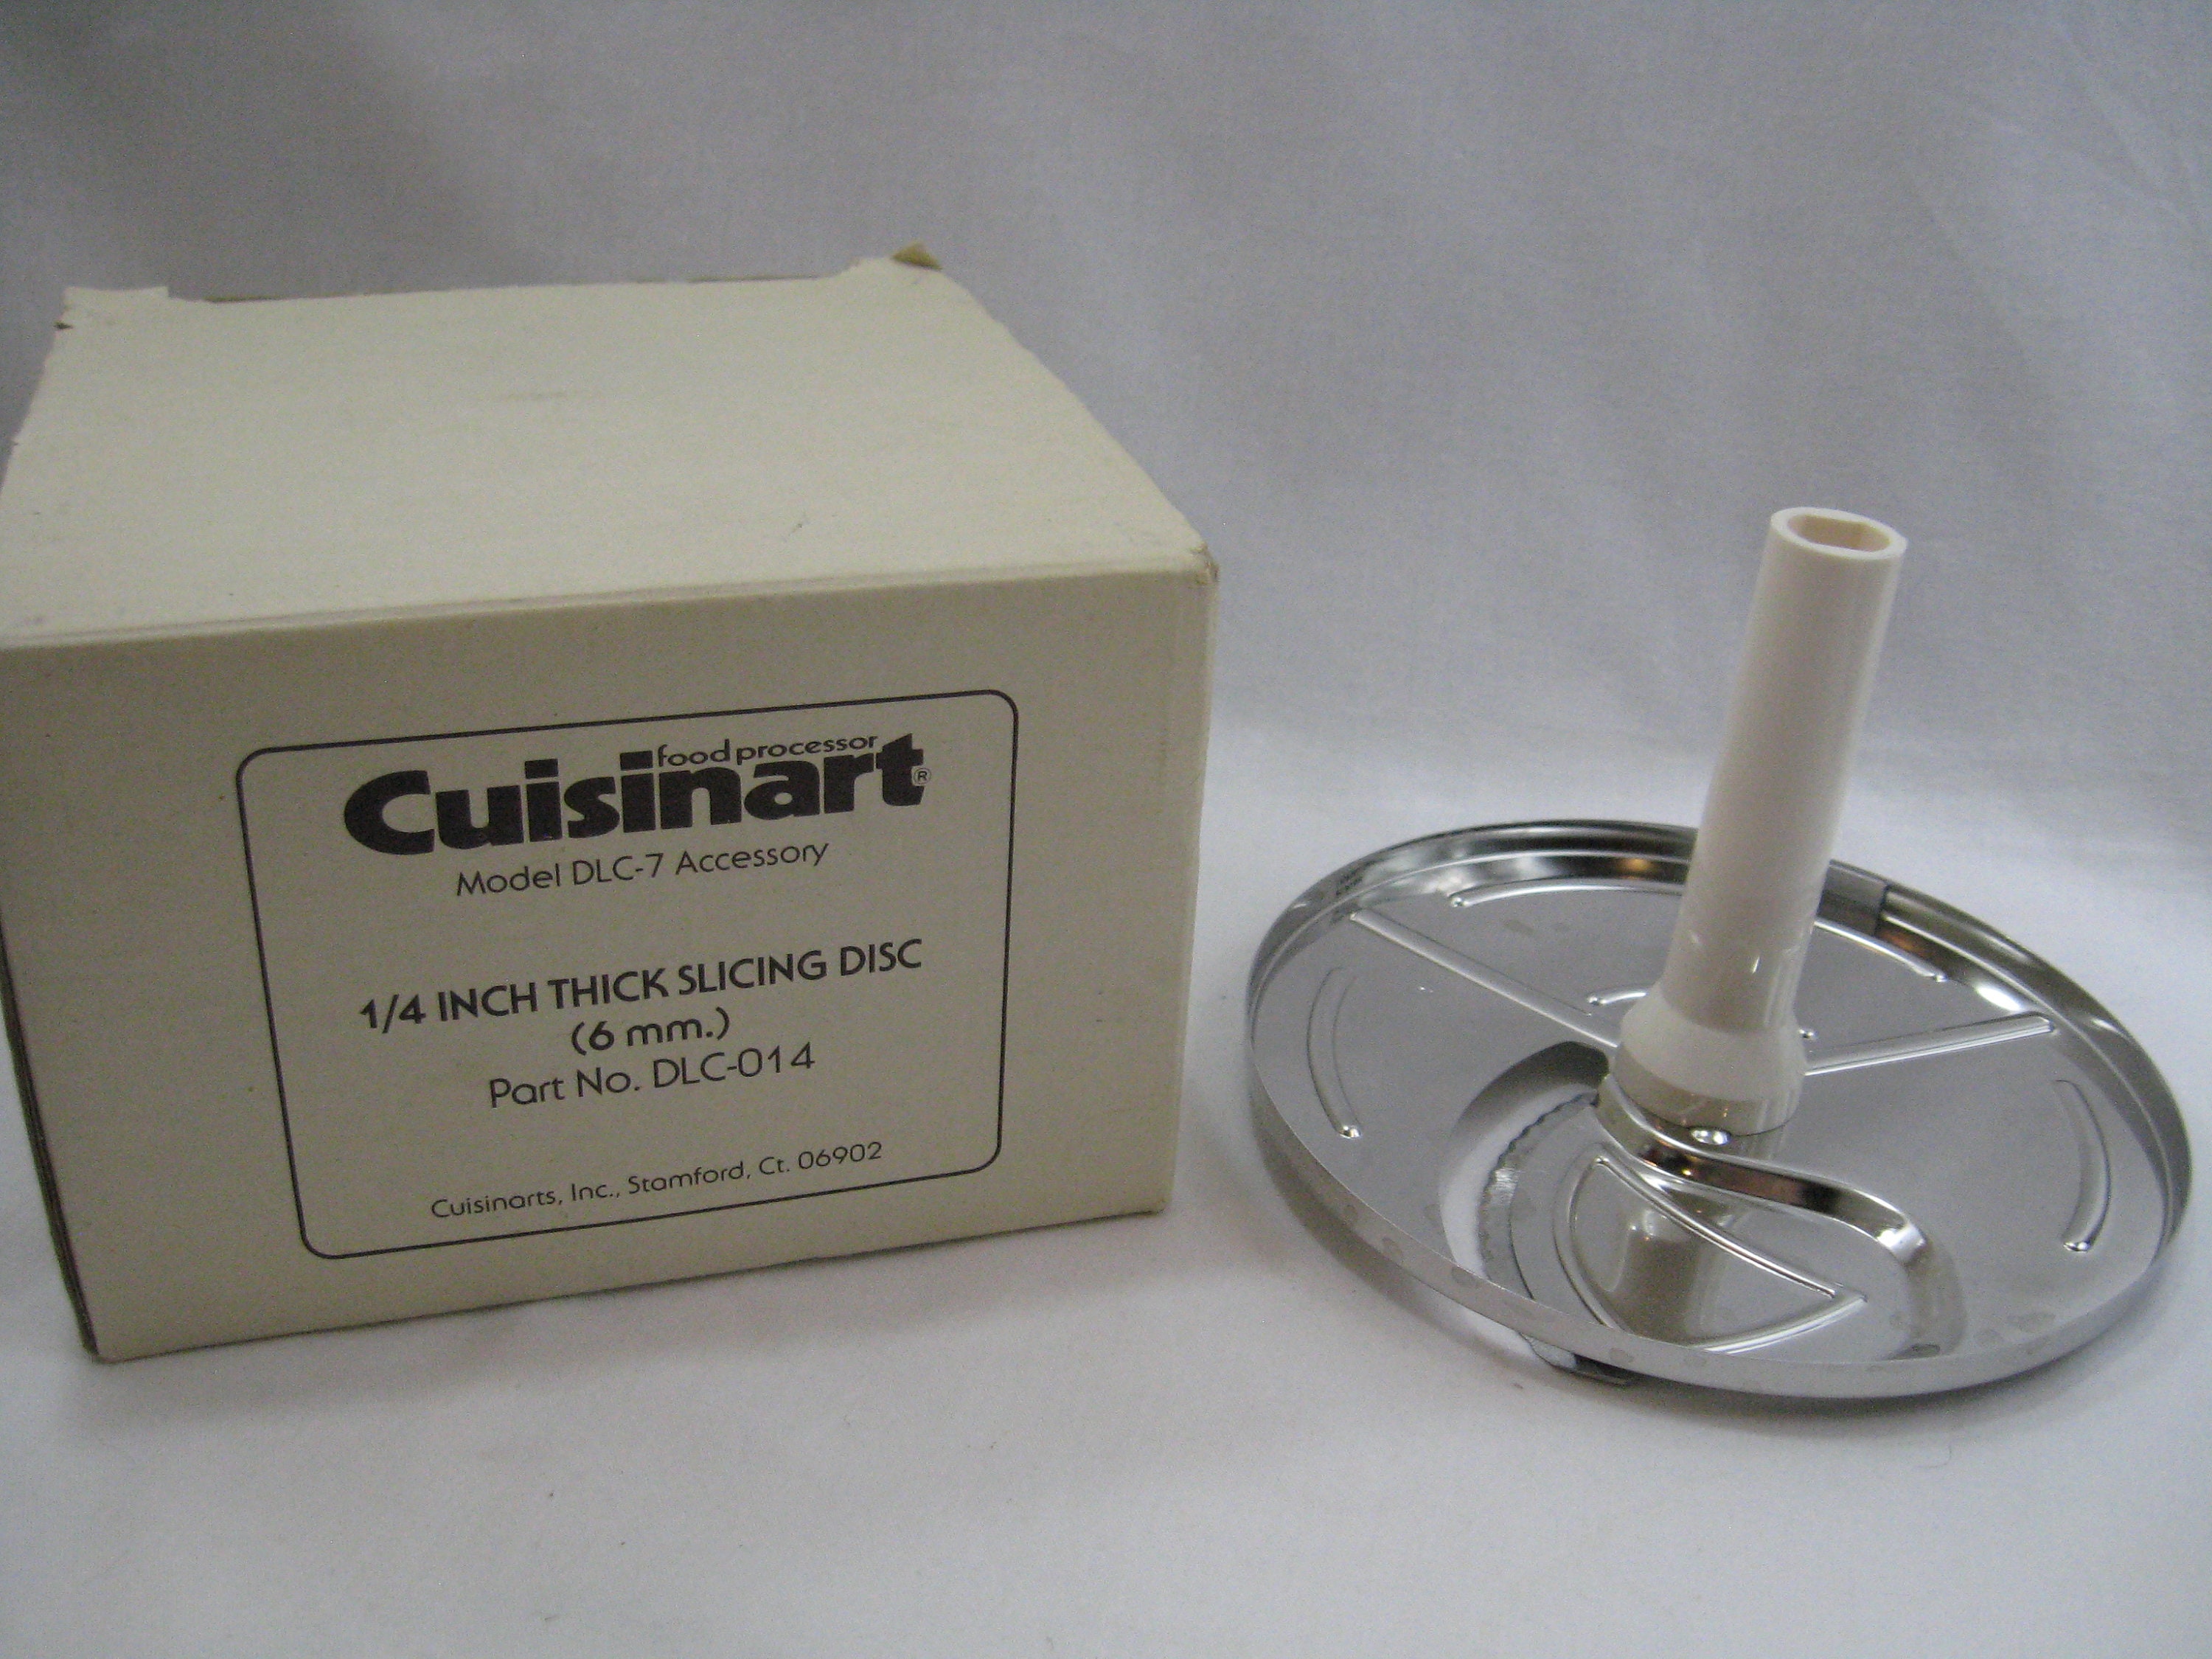 Generic Cutting Blade Disc Holder for Cuisinart Food Processors DLC-DH